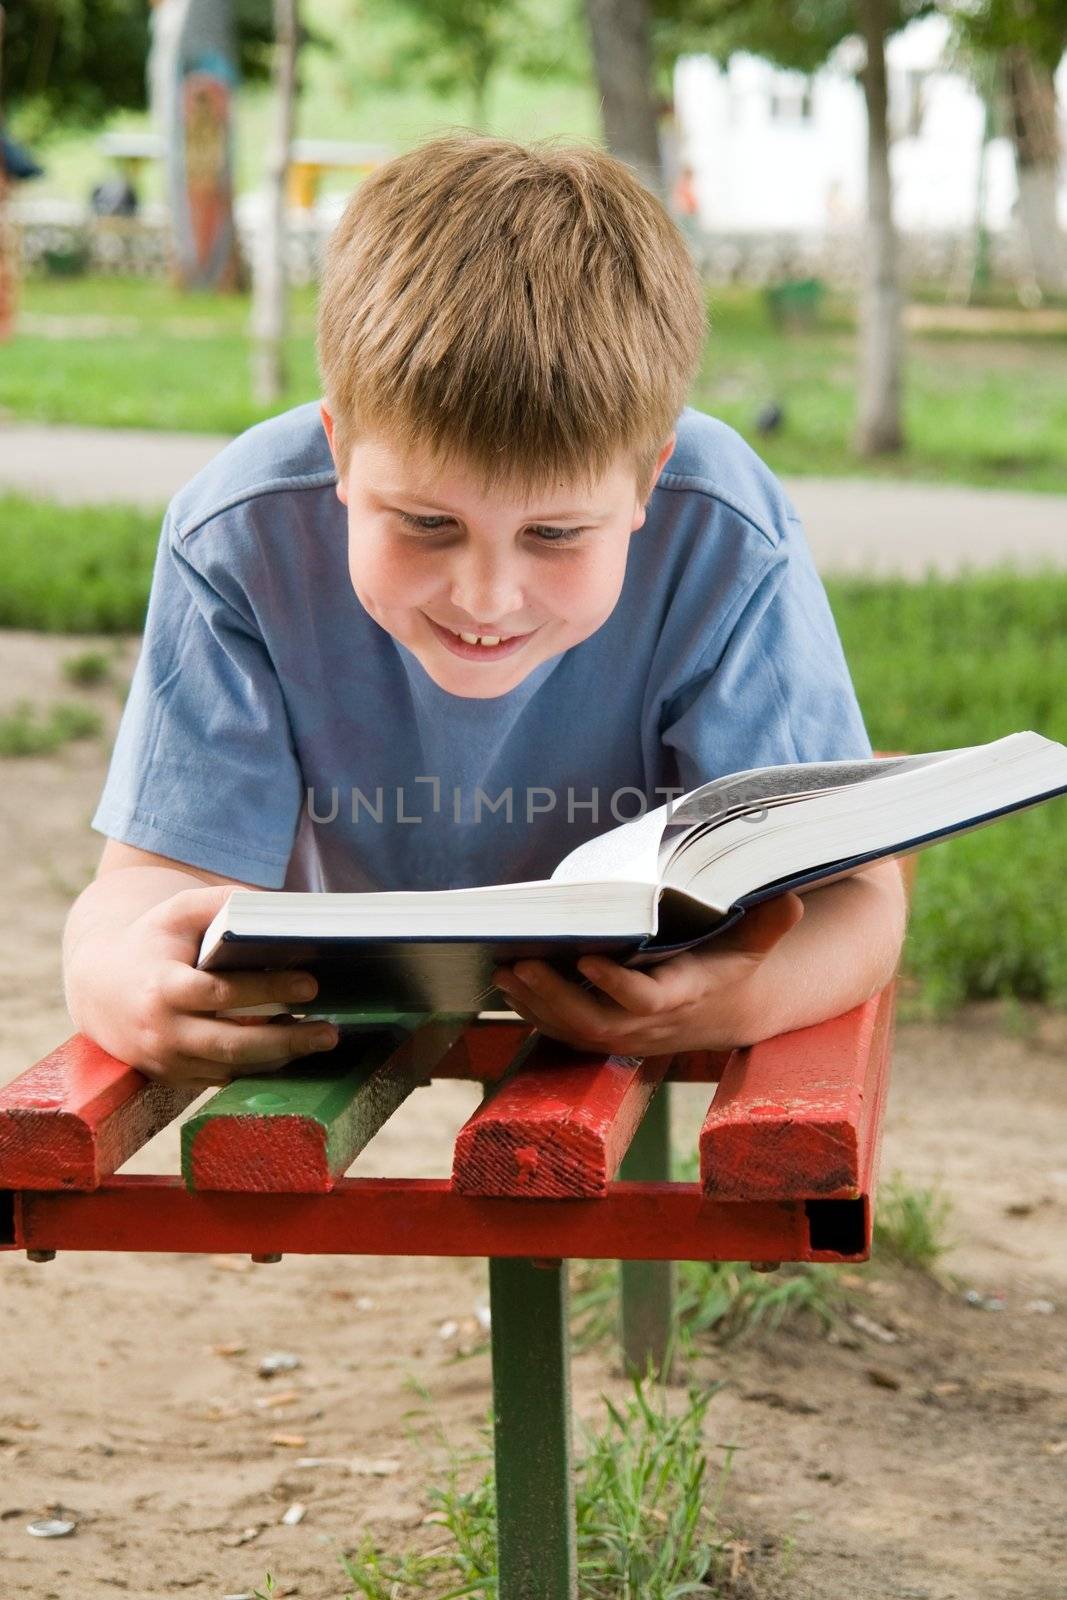 schoolboy reads the book on a bench in park